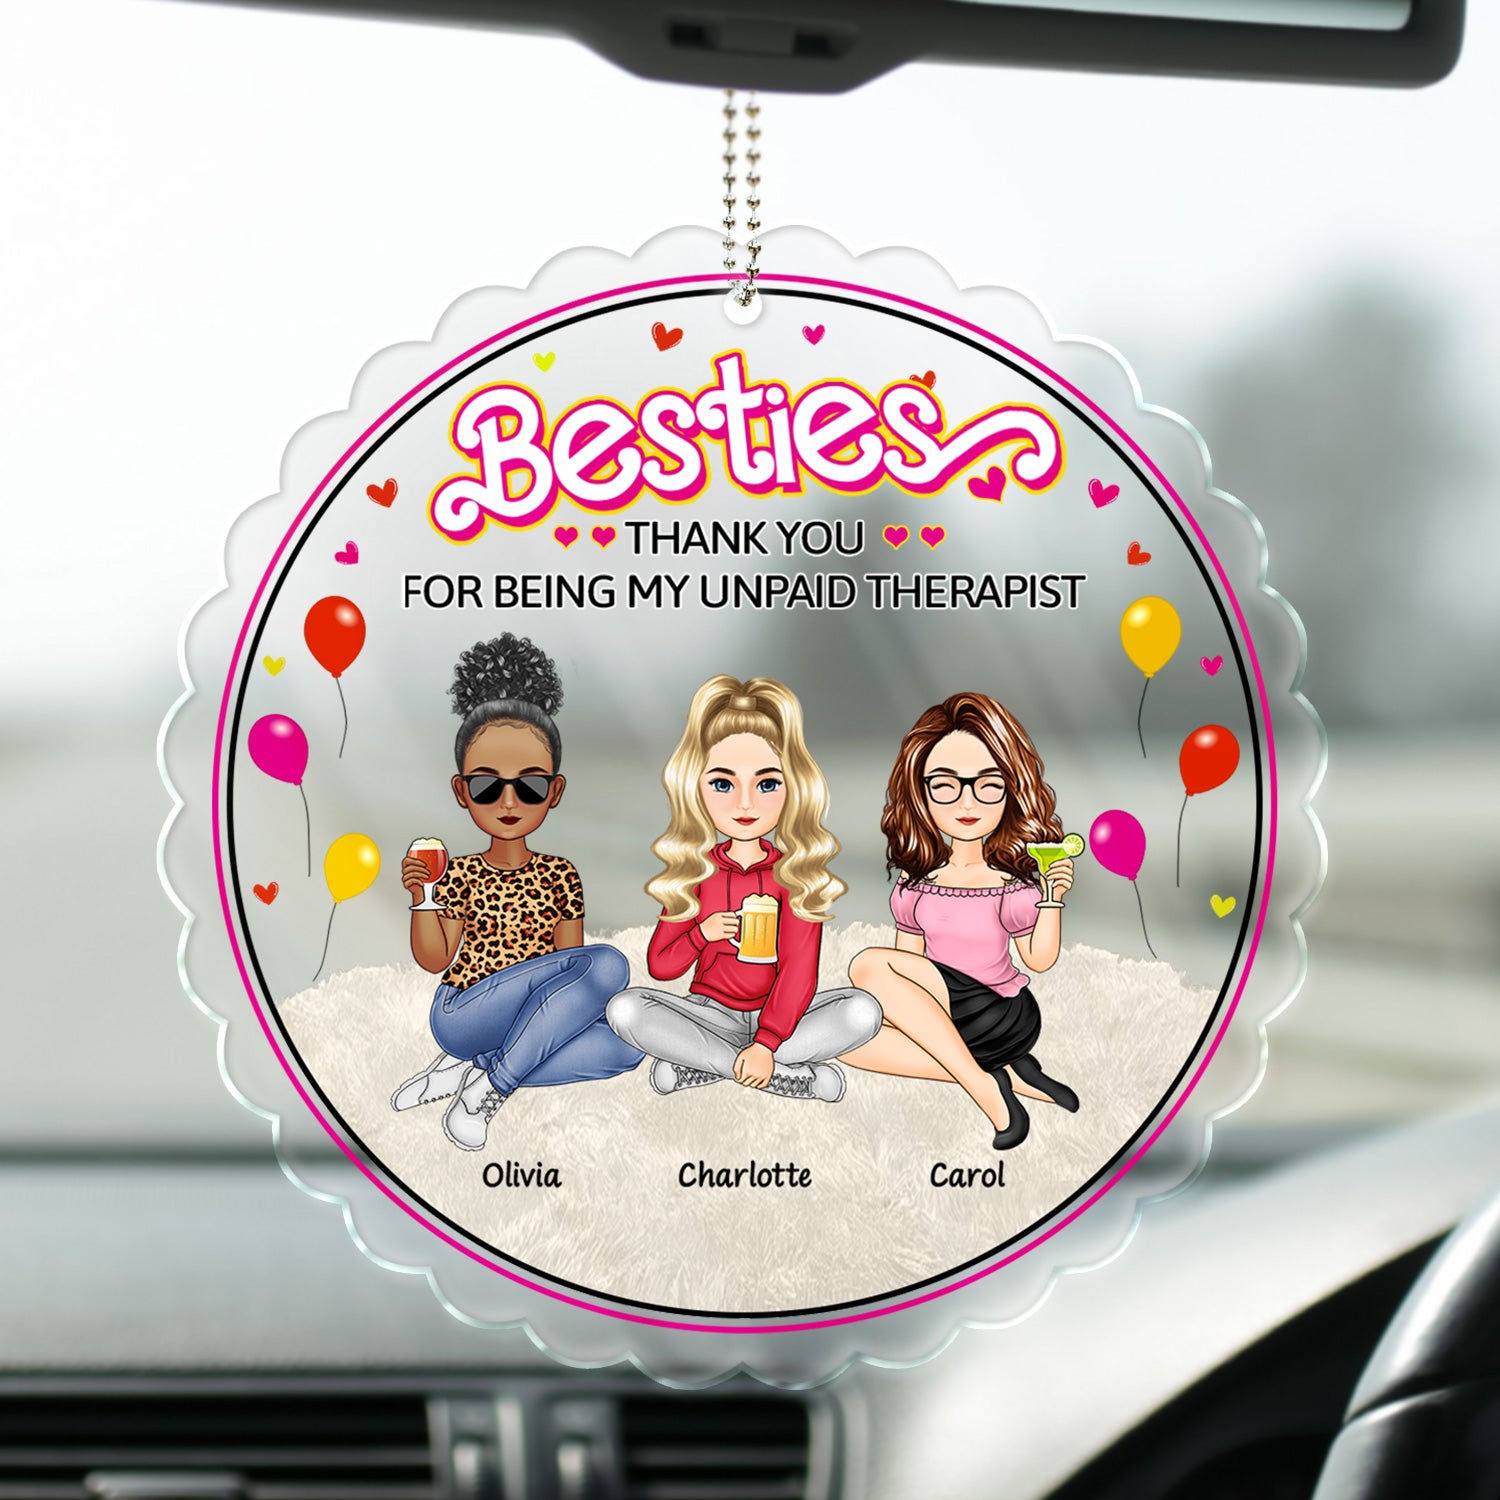 Besties Forever Thank You For Being My Unpaid Therapist - Gift For Bestie, Colleague, Sibling - Personalized Acrylic Car Hanger